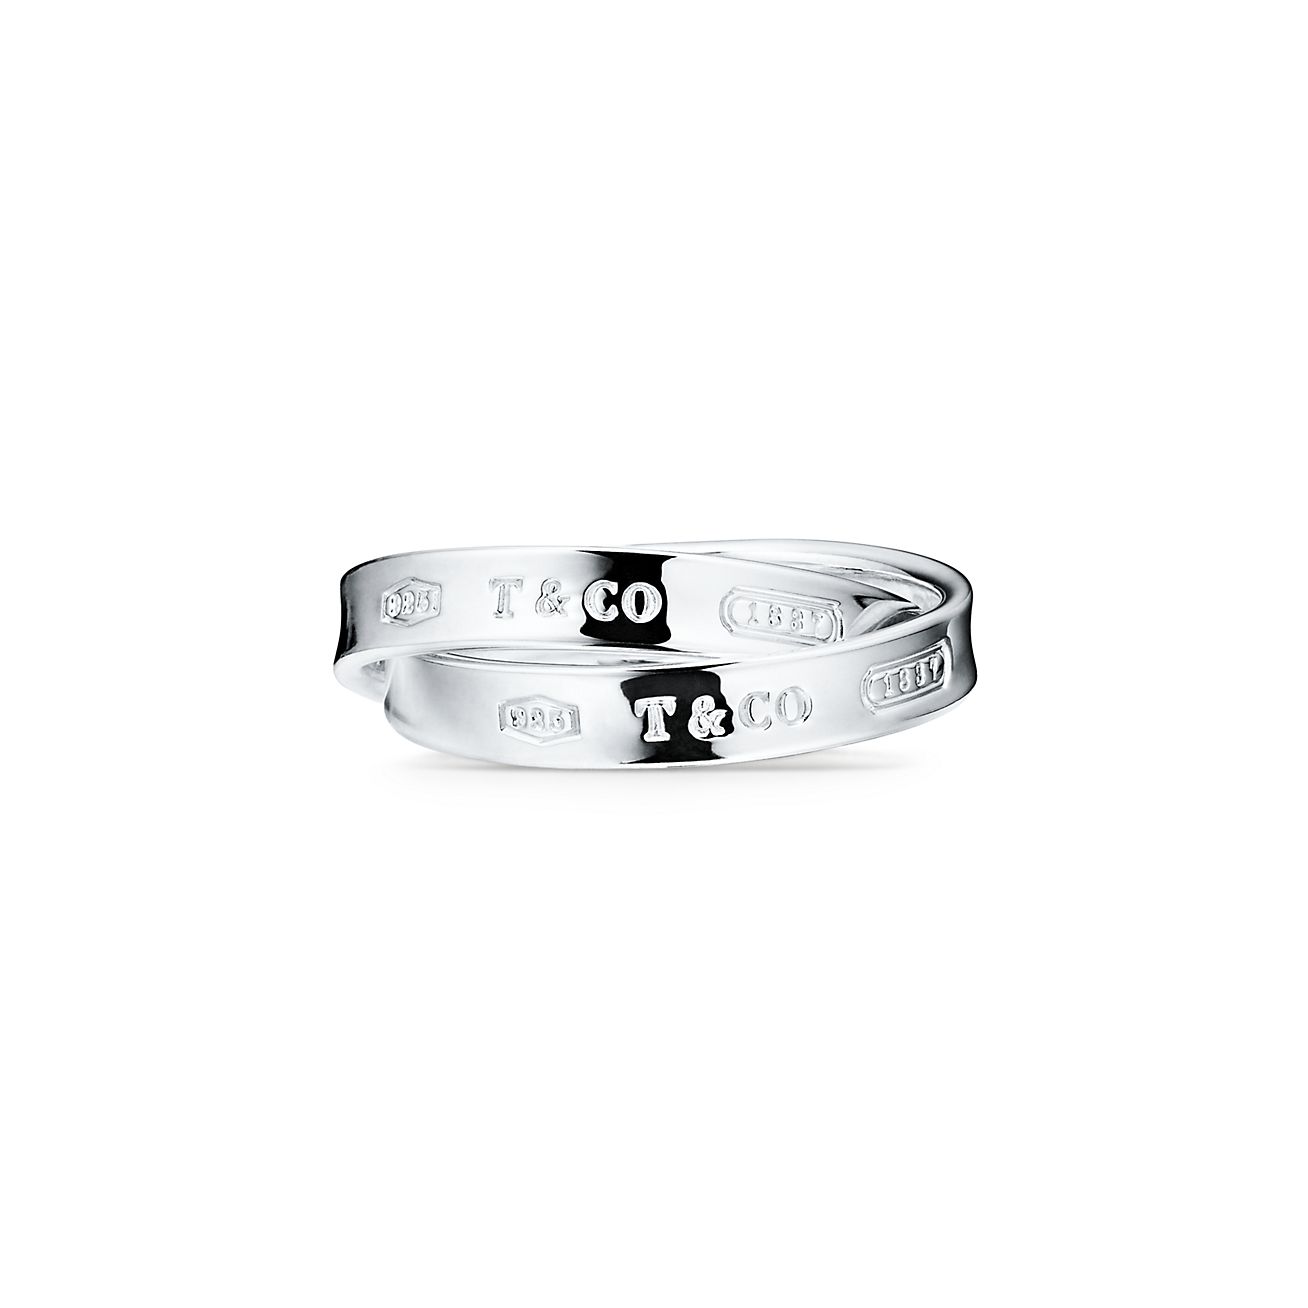 t and co ring